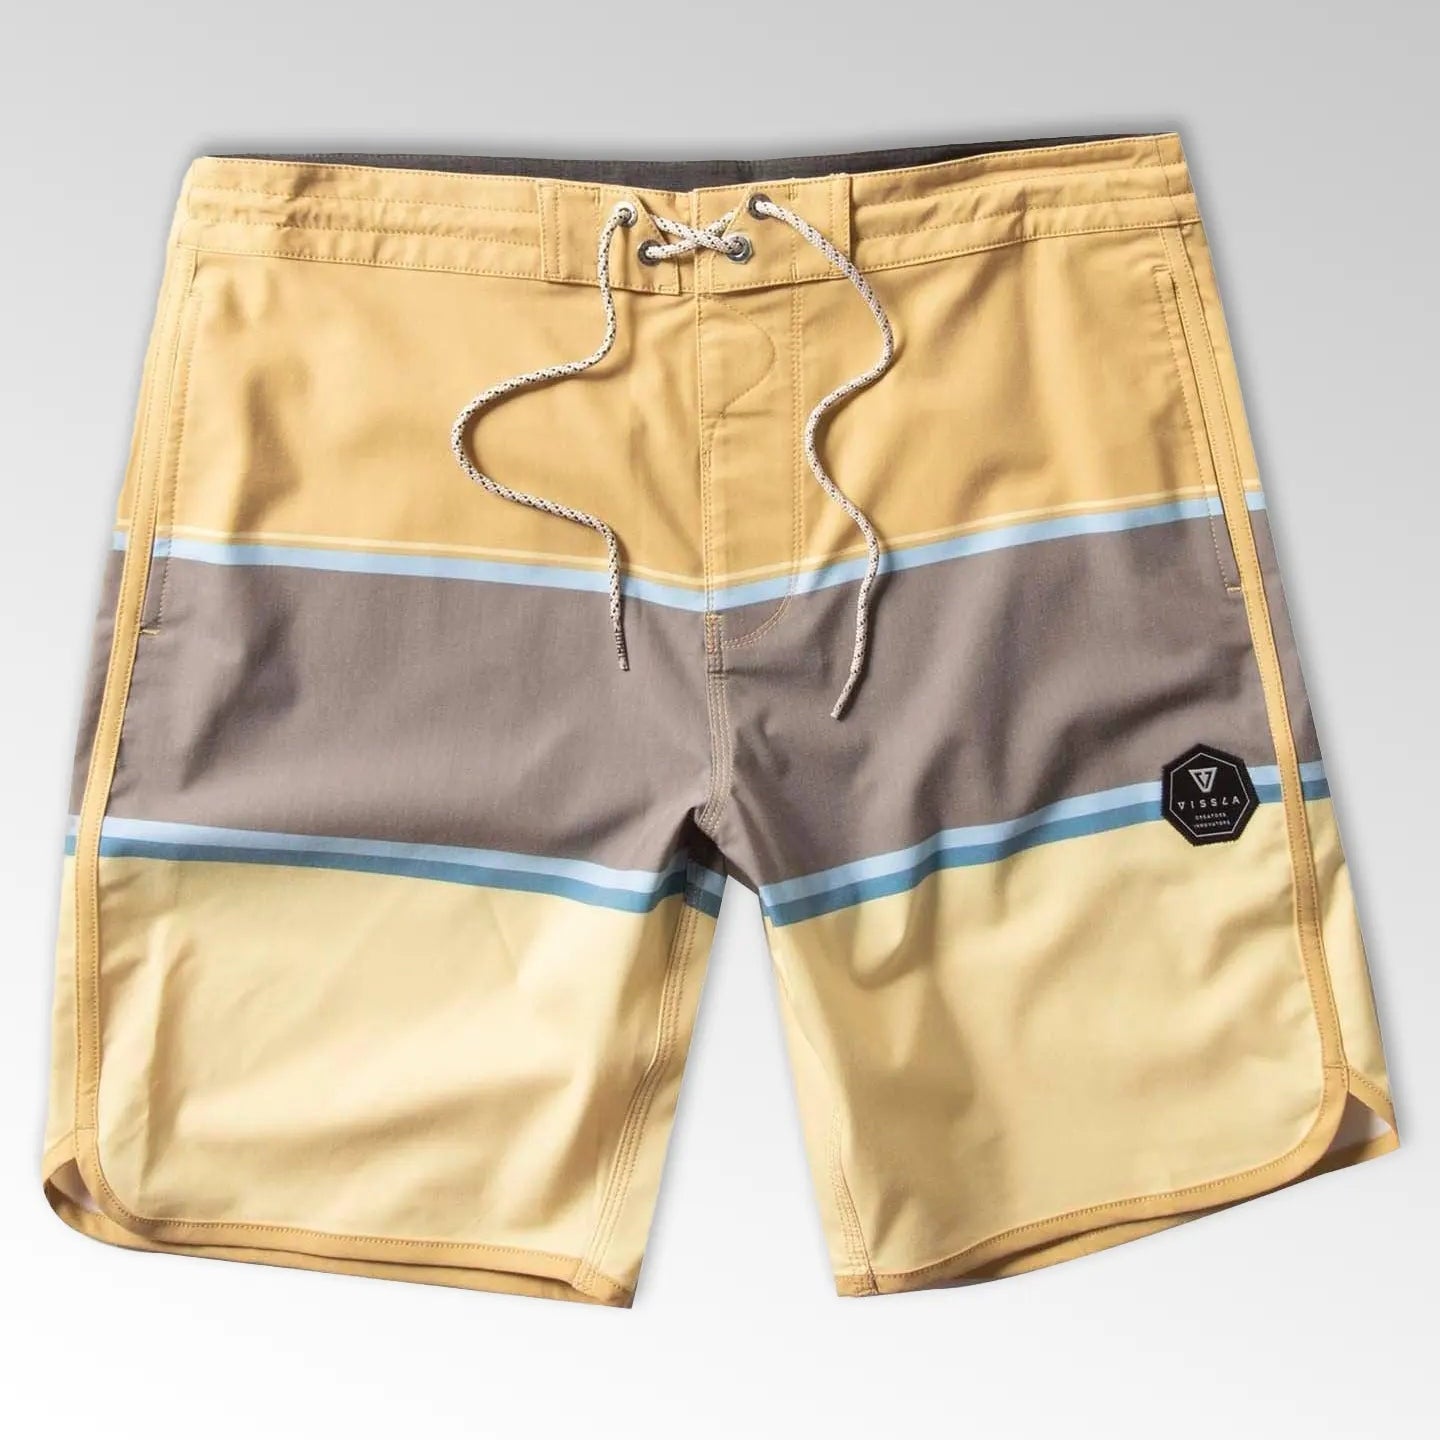 The Point 19.5" Boardshort Golden Hour - The Good Chic